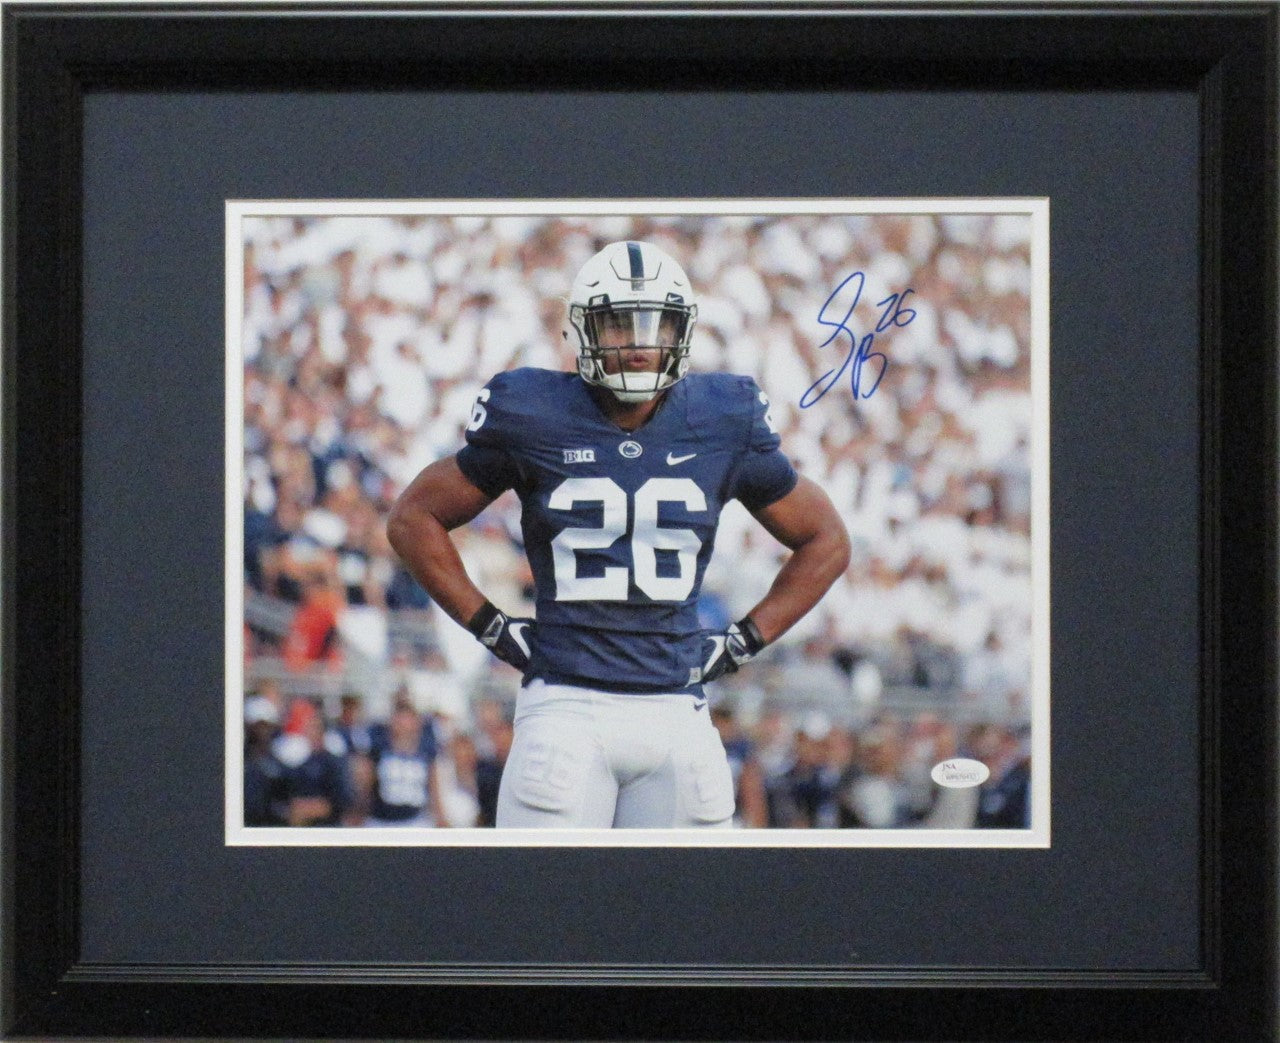 Saquon Barkley Penn State Nittany Lions Autographed 11x14 Photo Framed